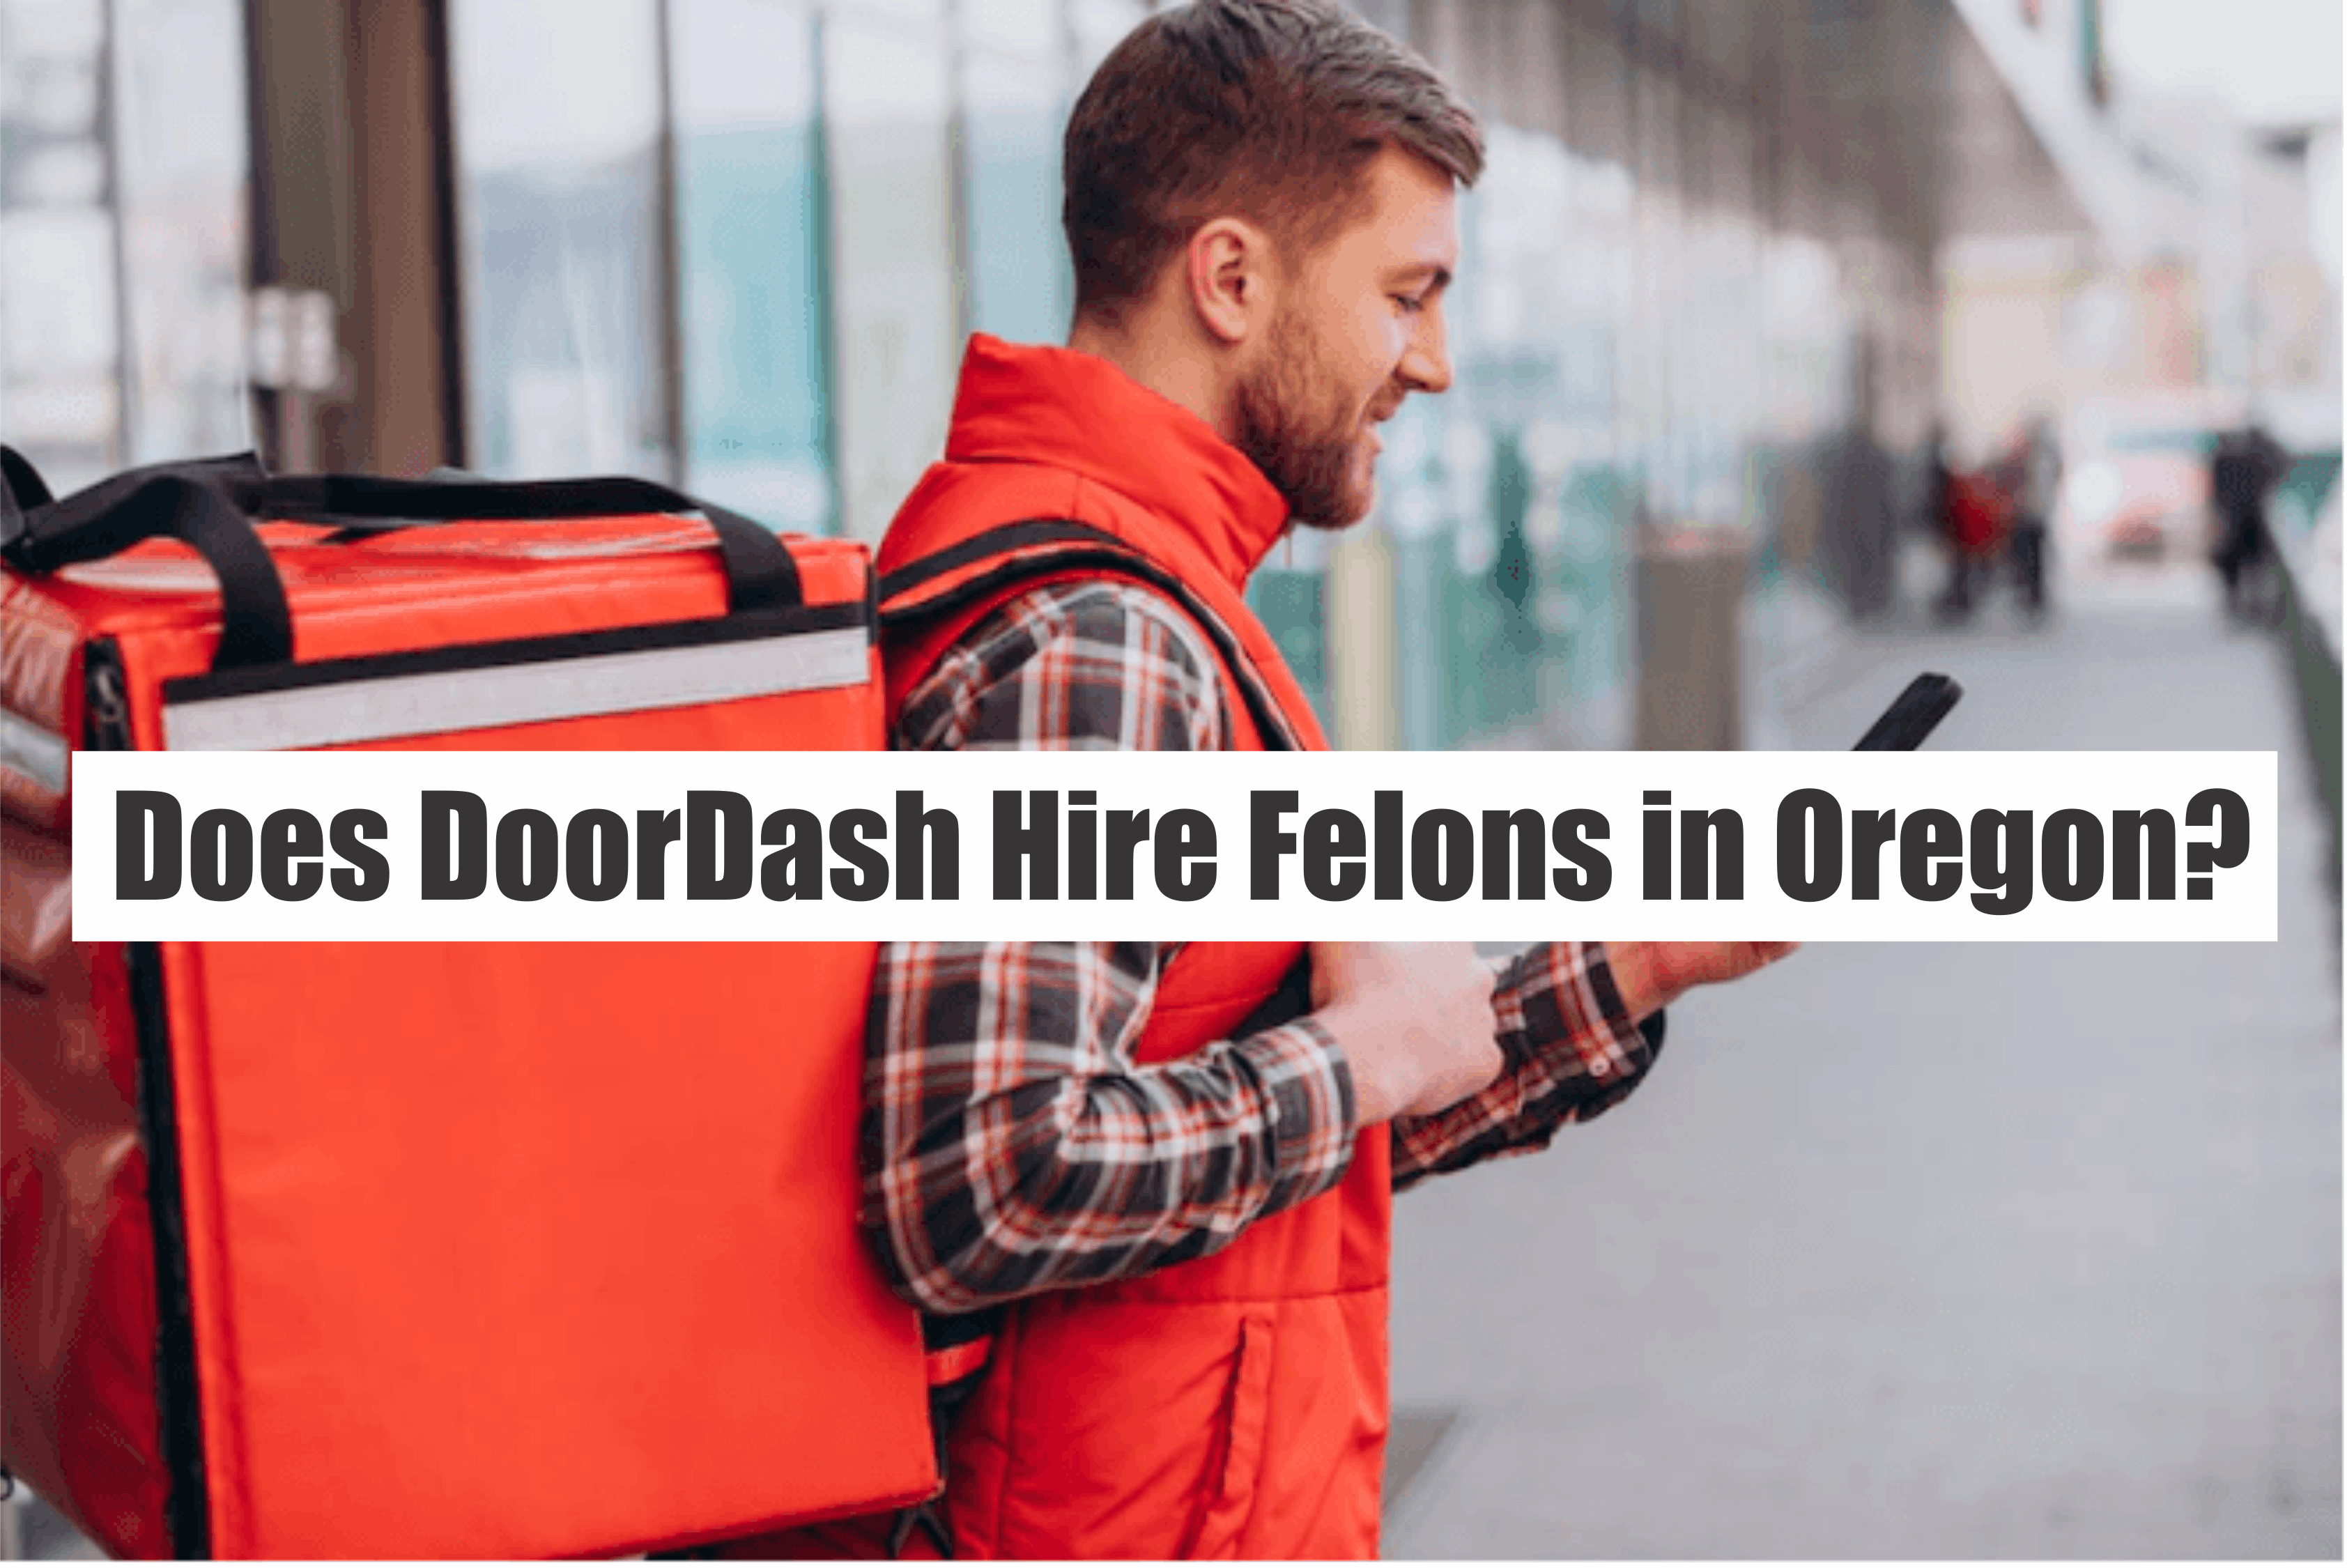 The Truth About DoorDash Hiring Felons in Oregon